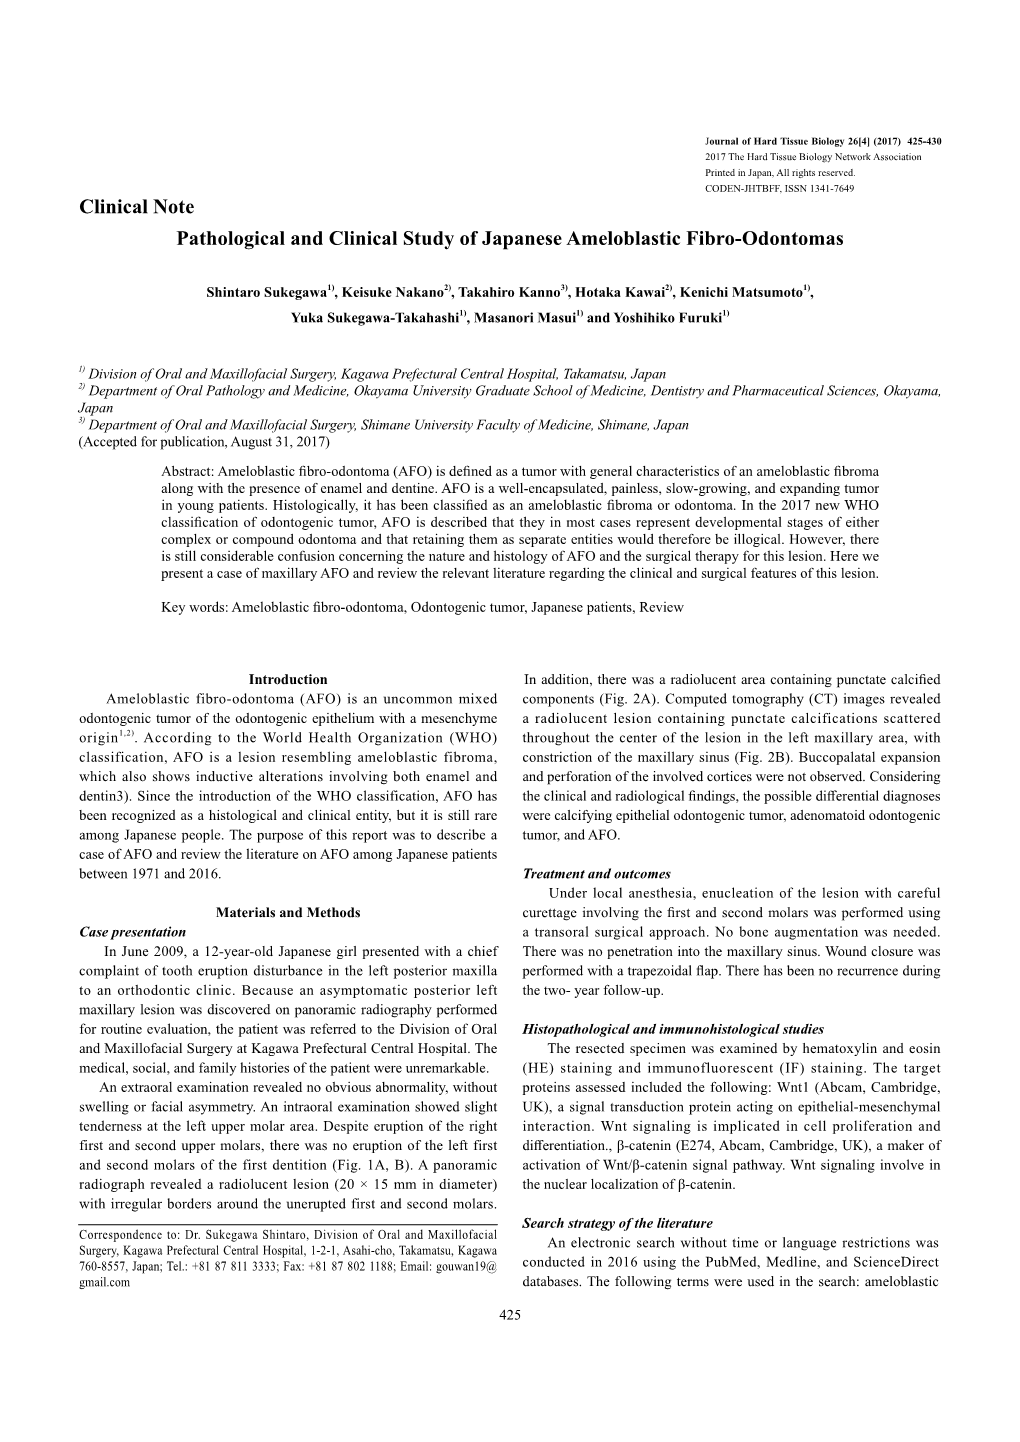 Clinical Note Pathological and Clinical Study of Japanese Ameloblastic Fibro-Odontomas